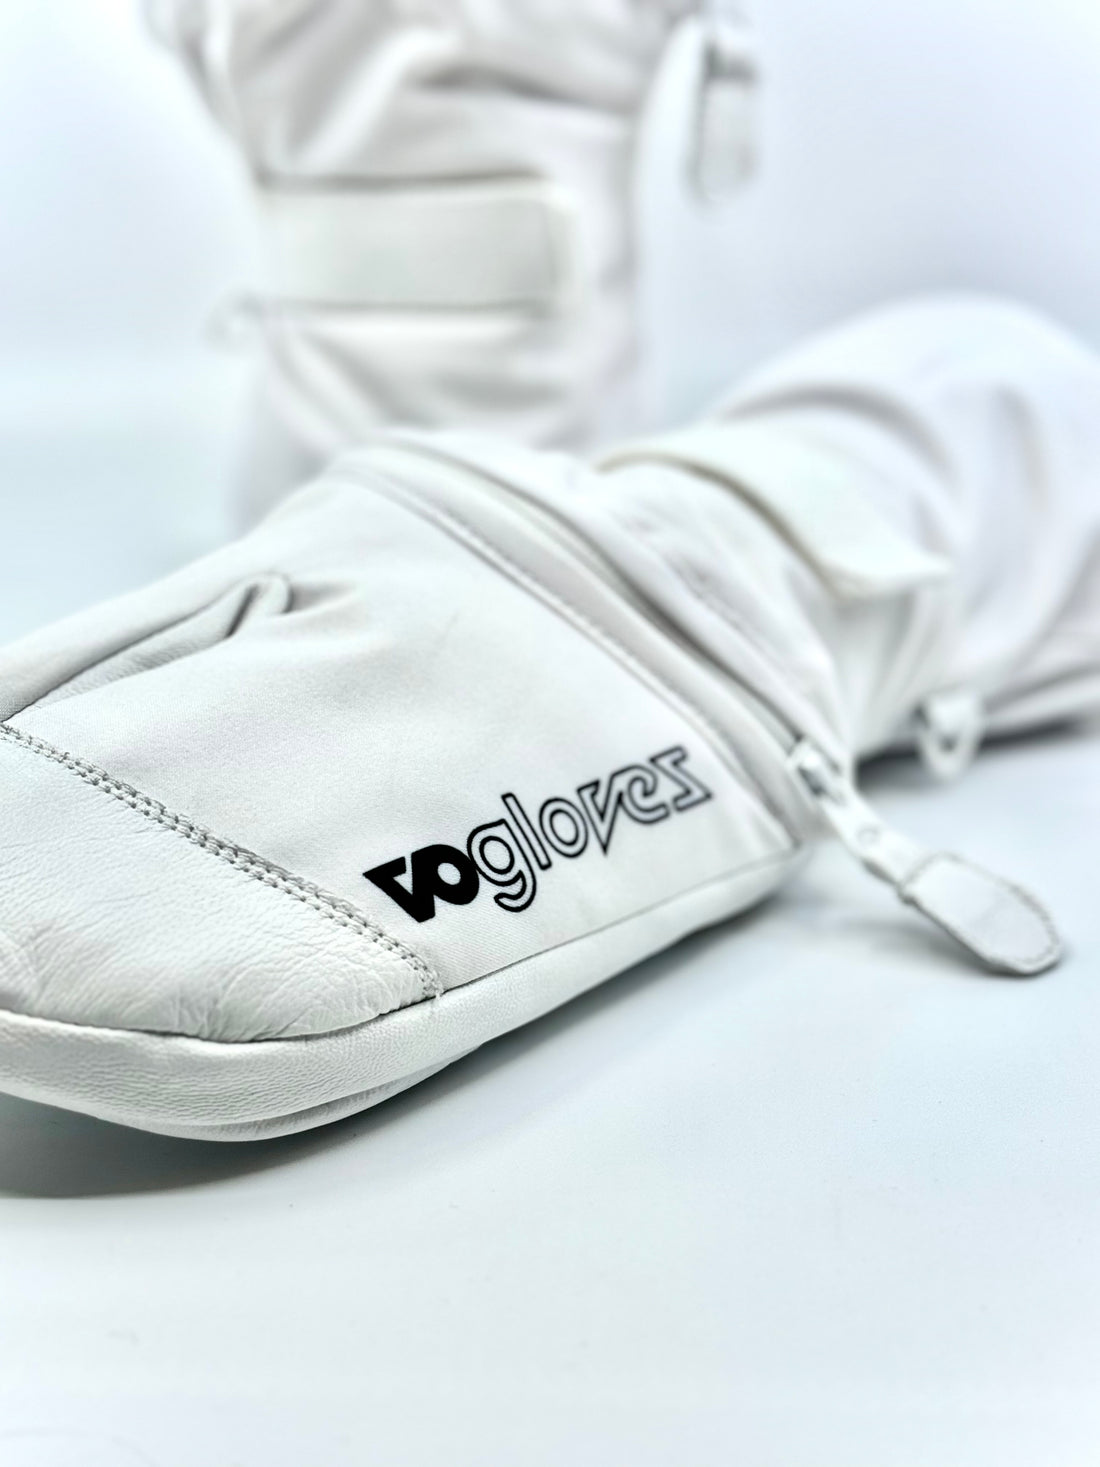 NEW! ALL WHITE TRIGGER MITTS